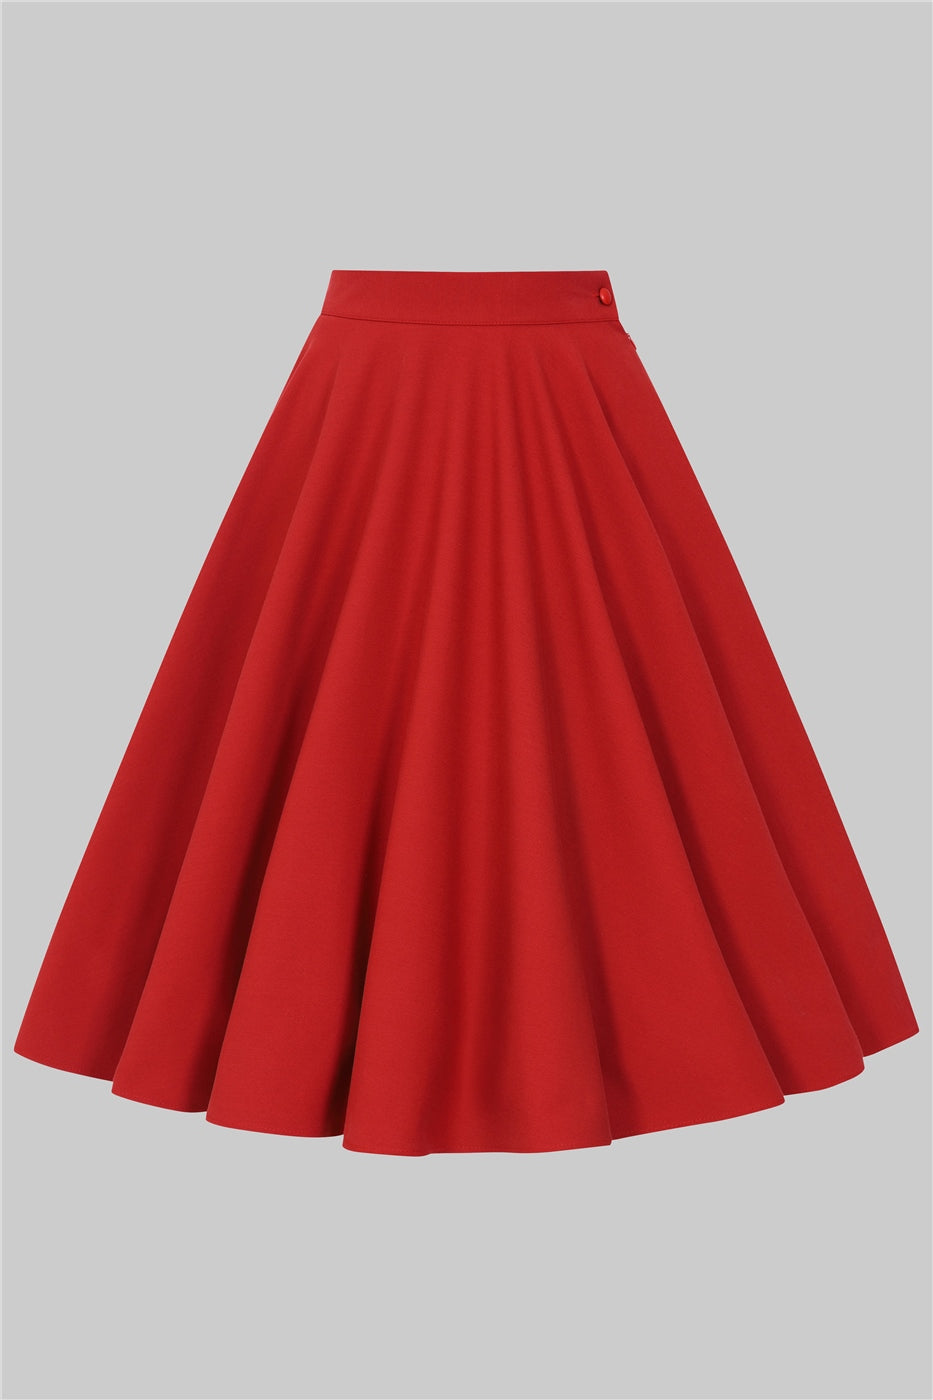 Milla Plain Swing Skirt by Collectif